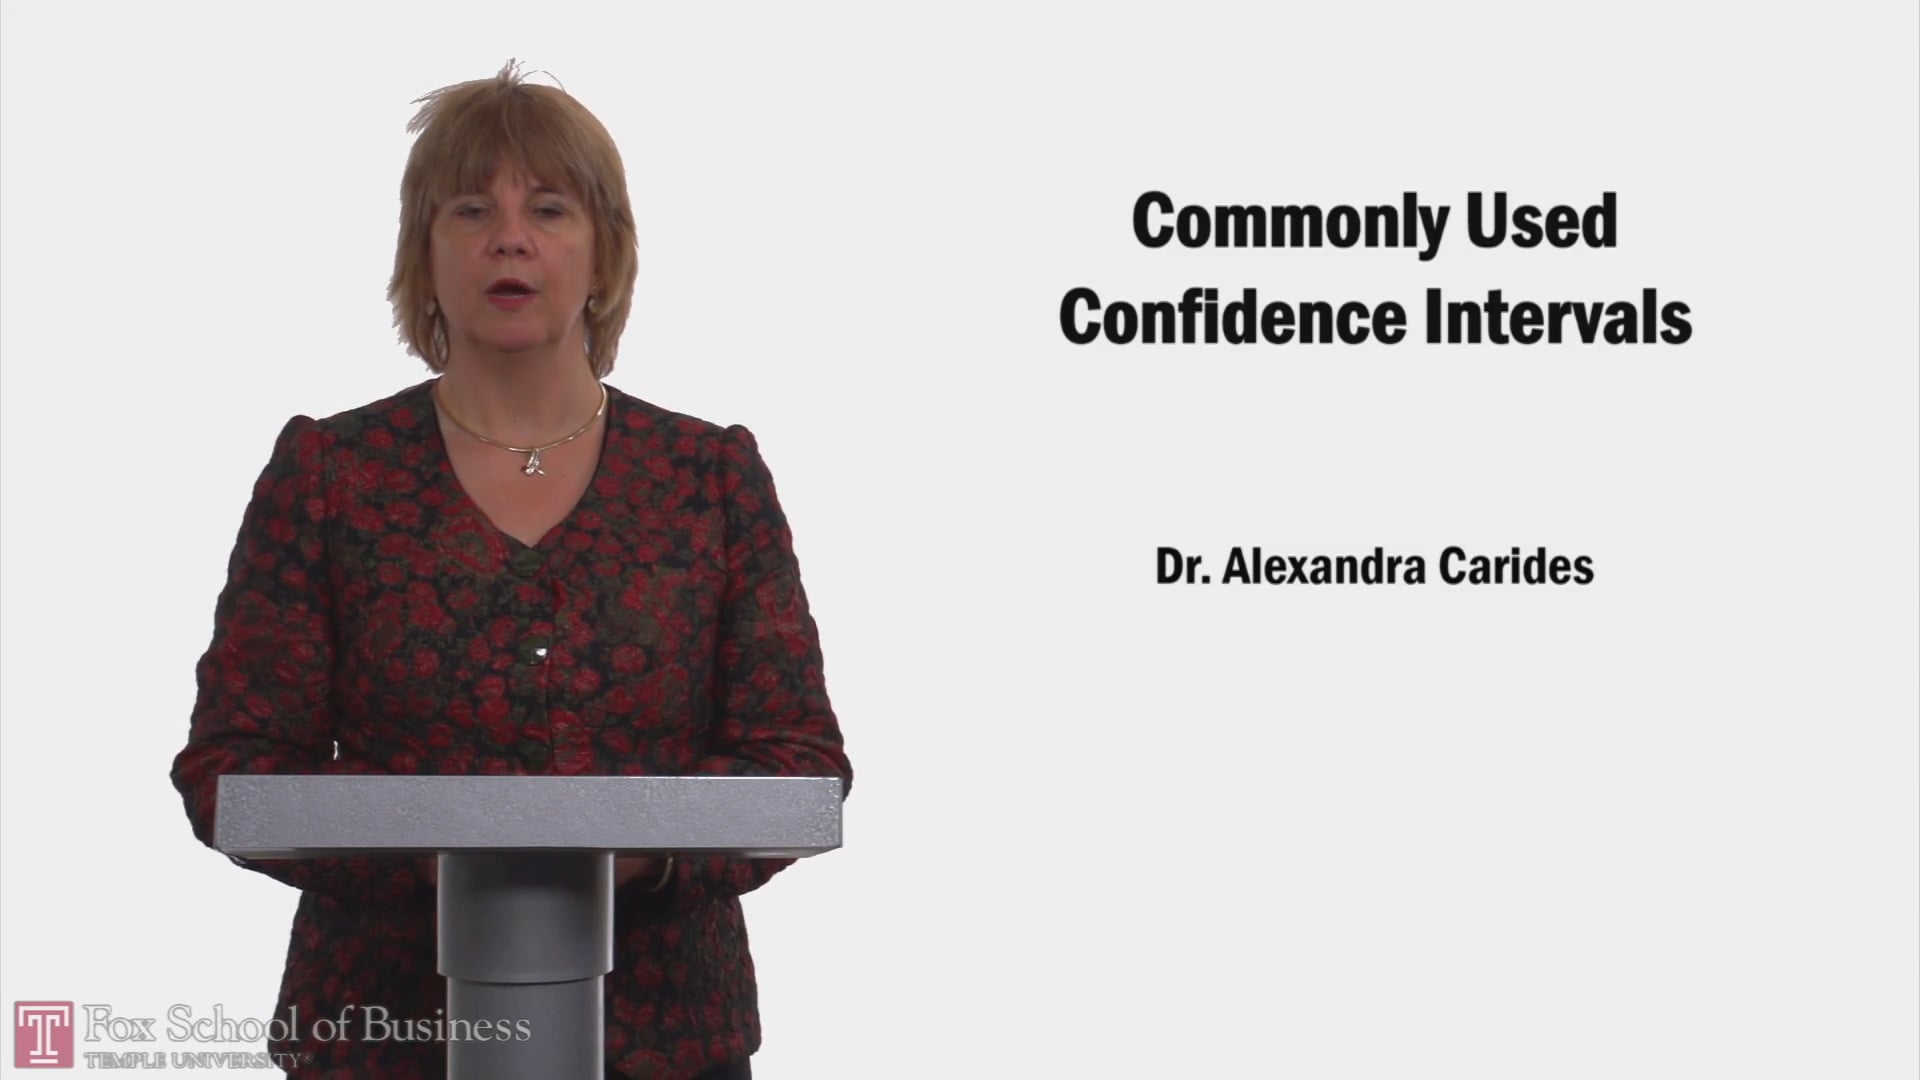 Commonly Used Confidence Intervals